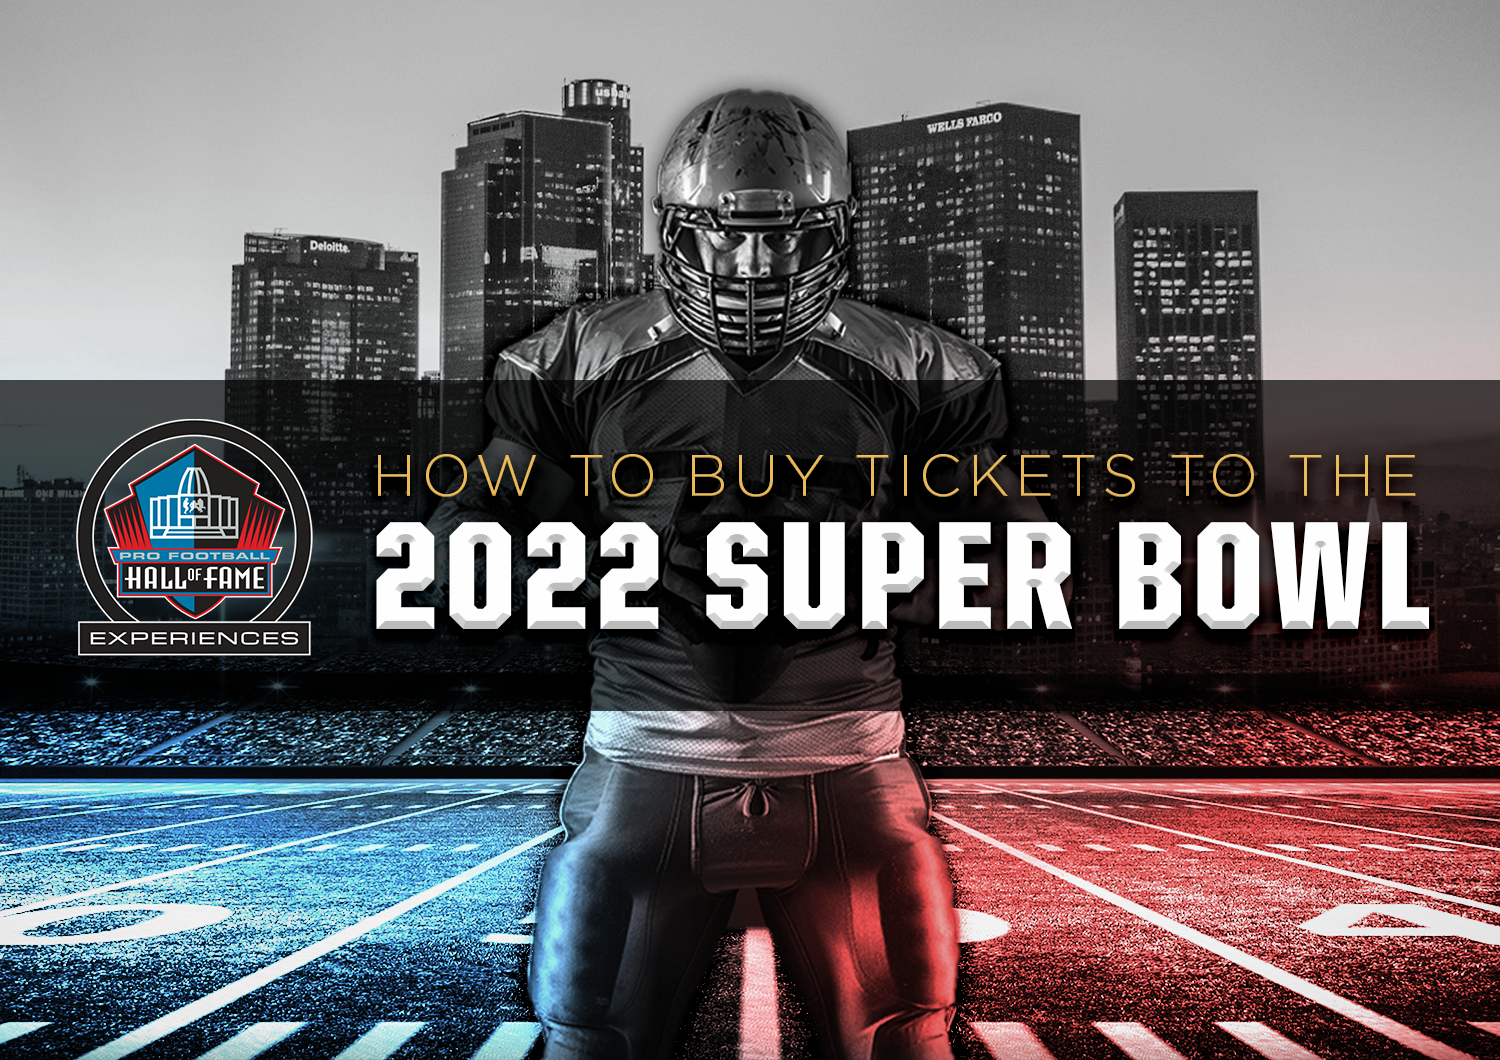 how much is a ticket for the super bowl 2022